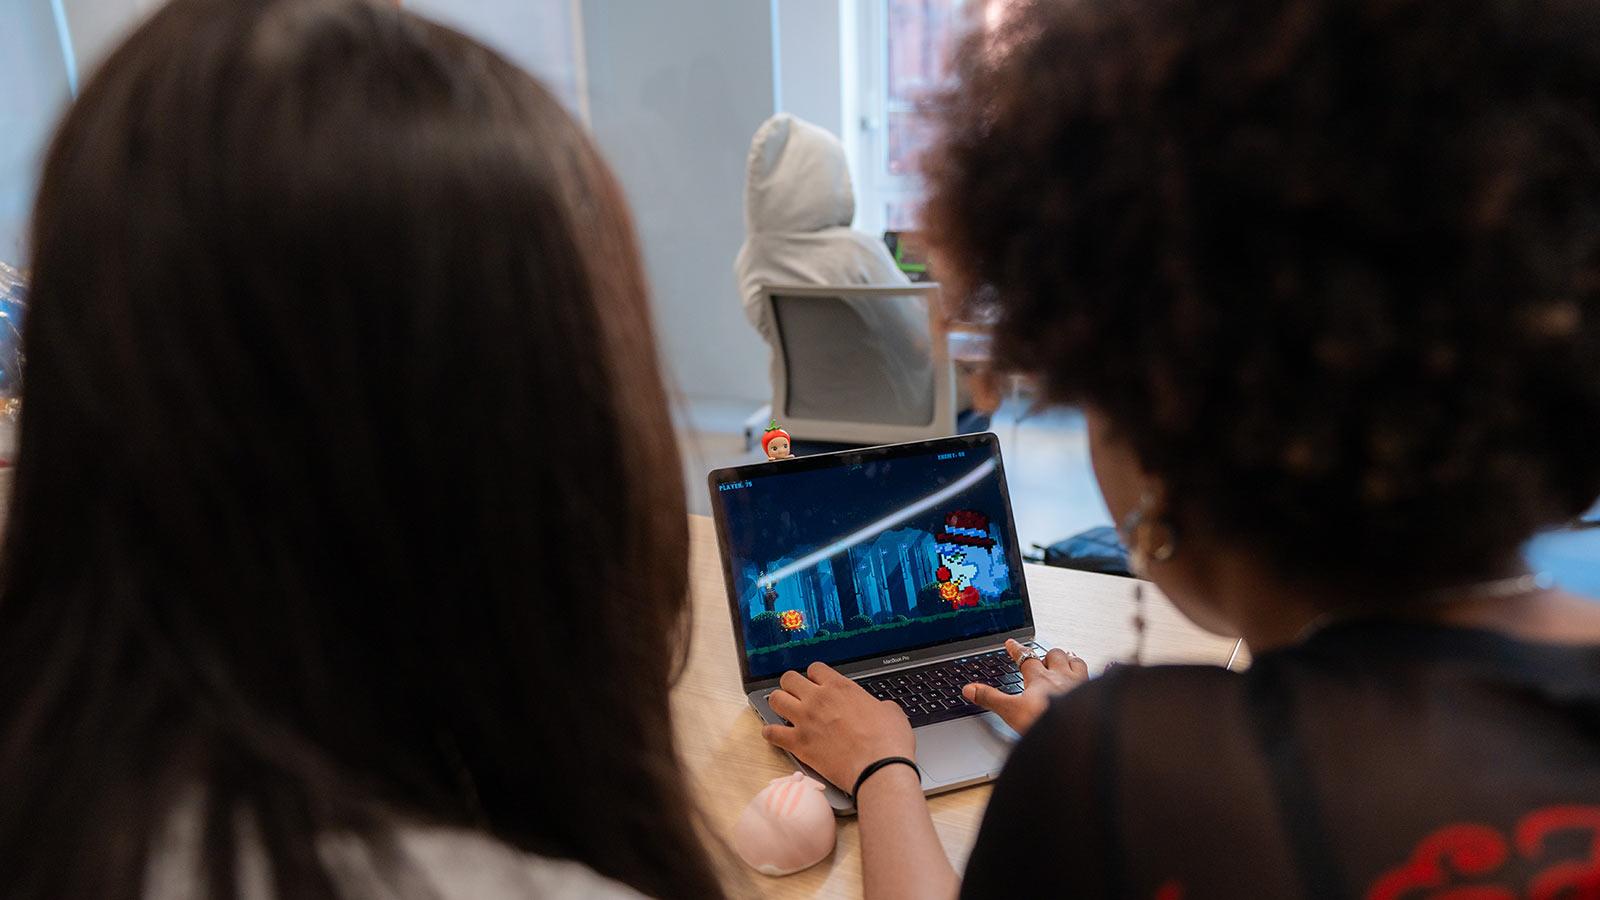 Pace students play a student game on a laptop